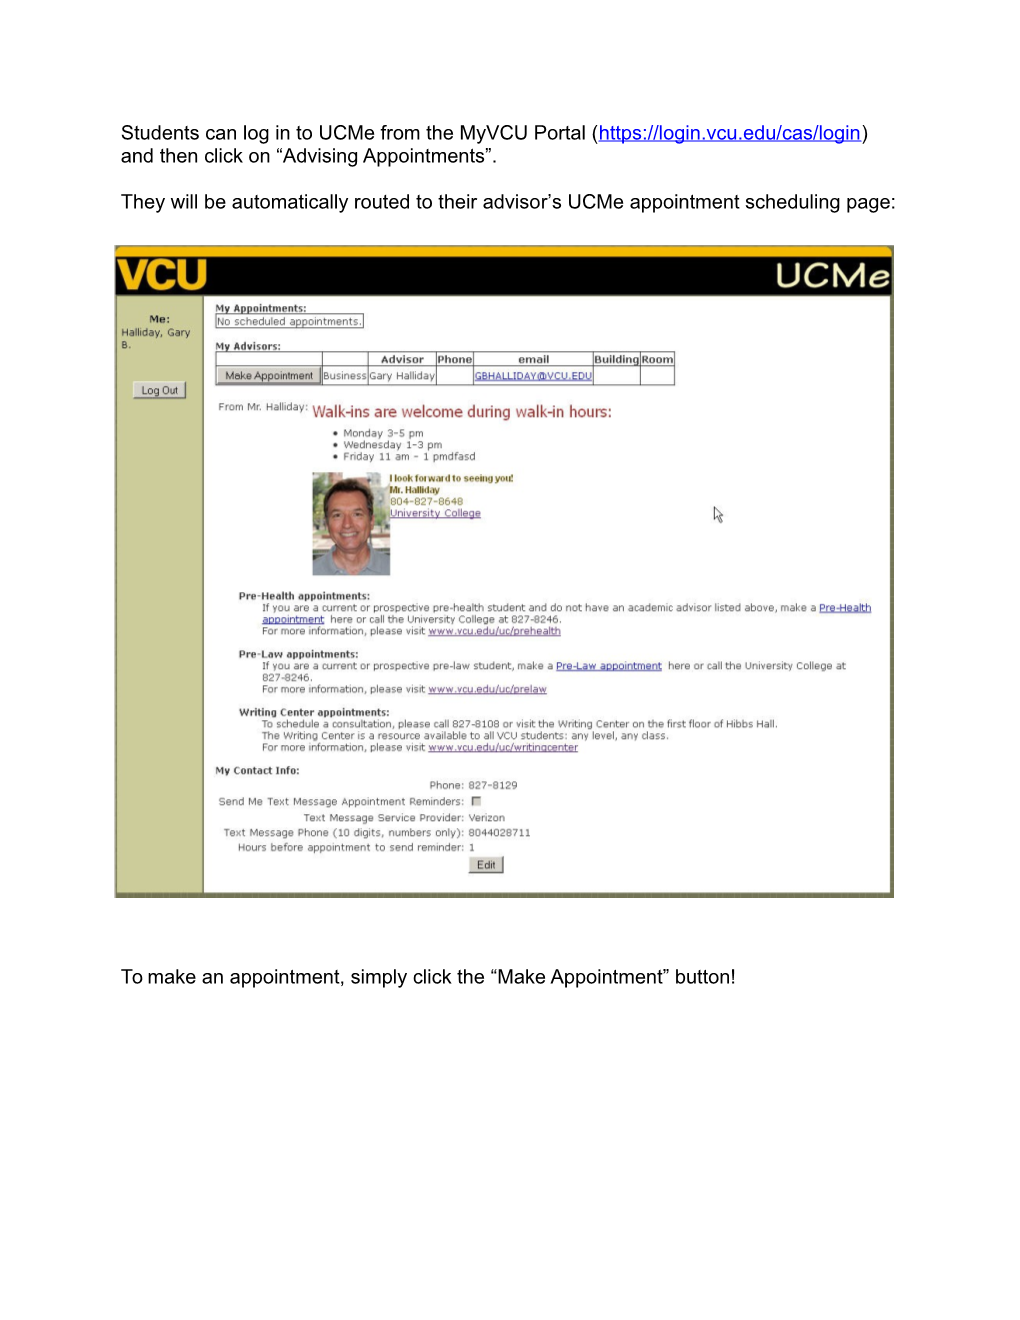 Students Can Log in to Ucme from the Myvcu Portal (